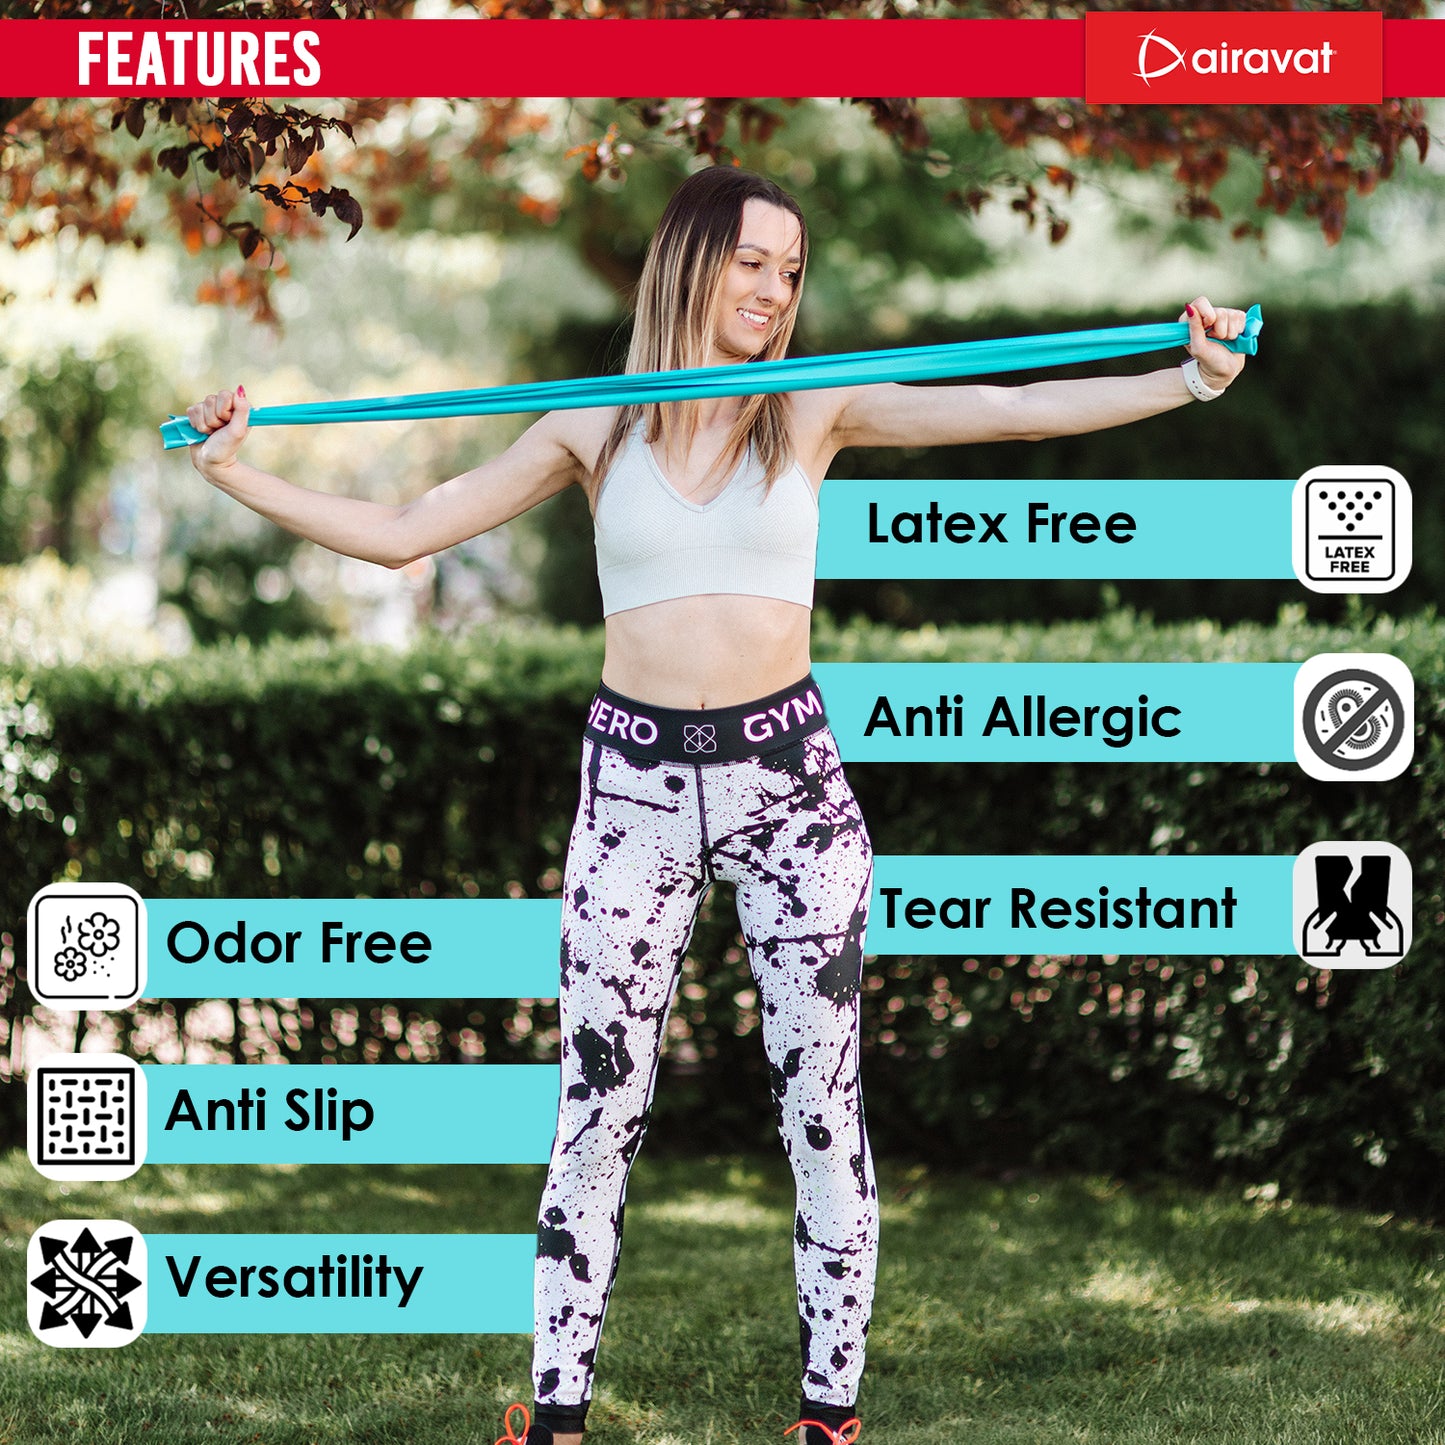 Latex free exercise band Features blue